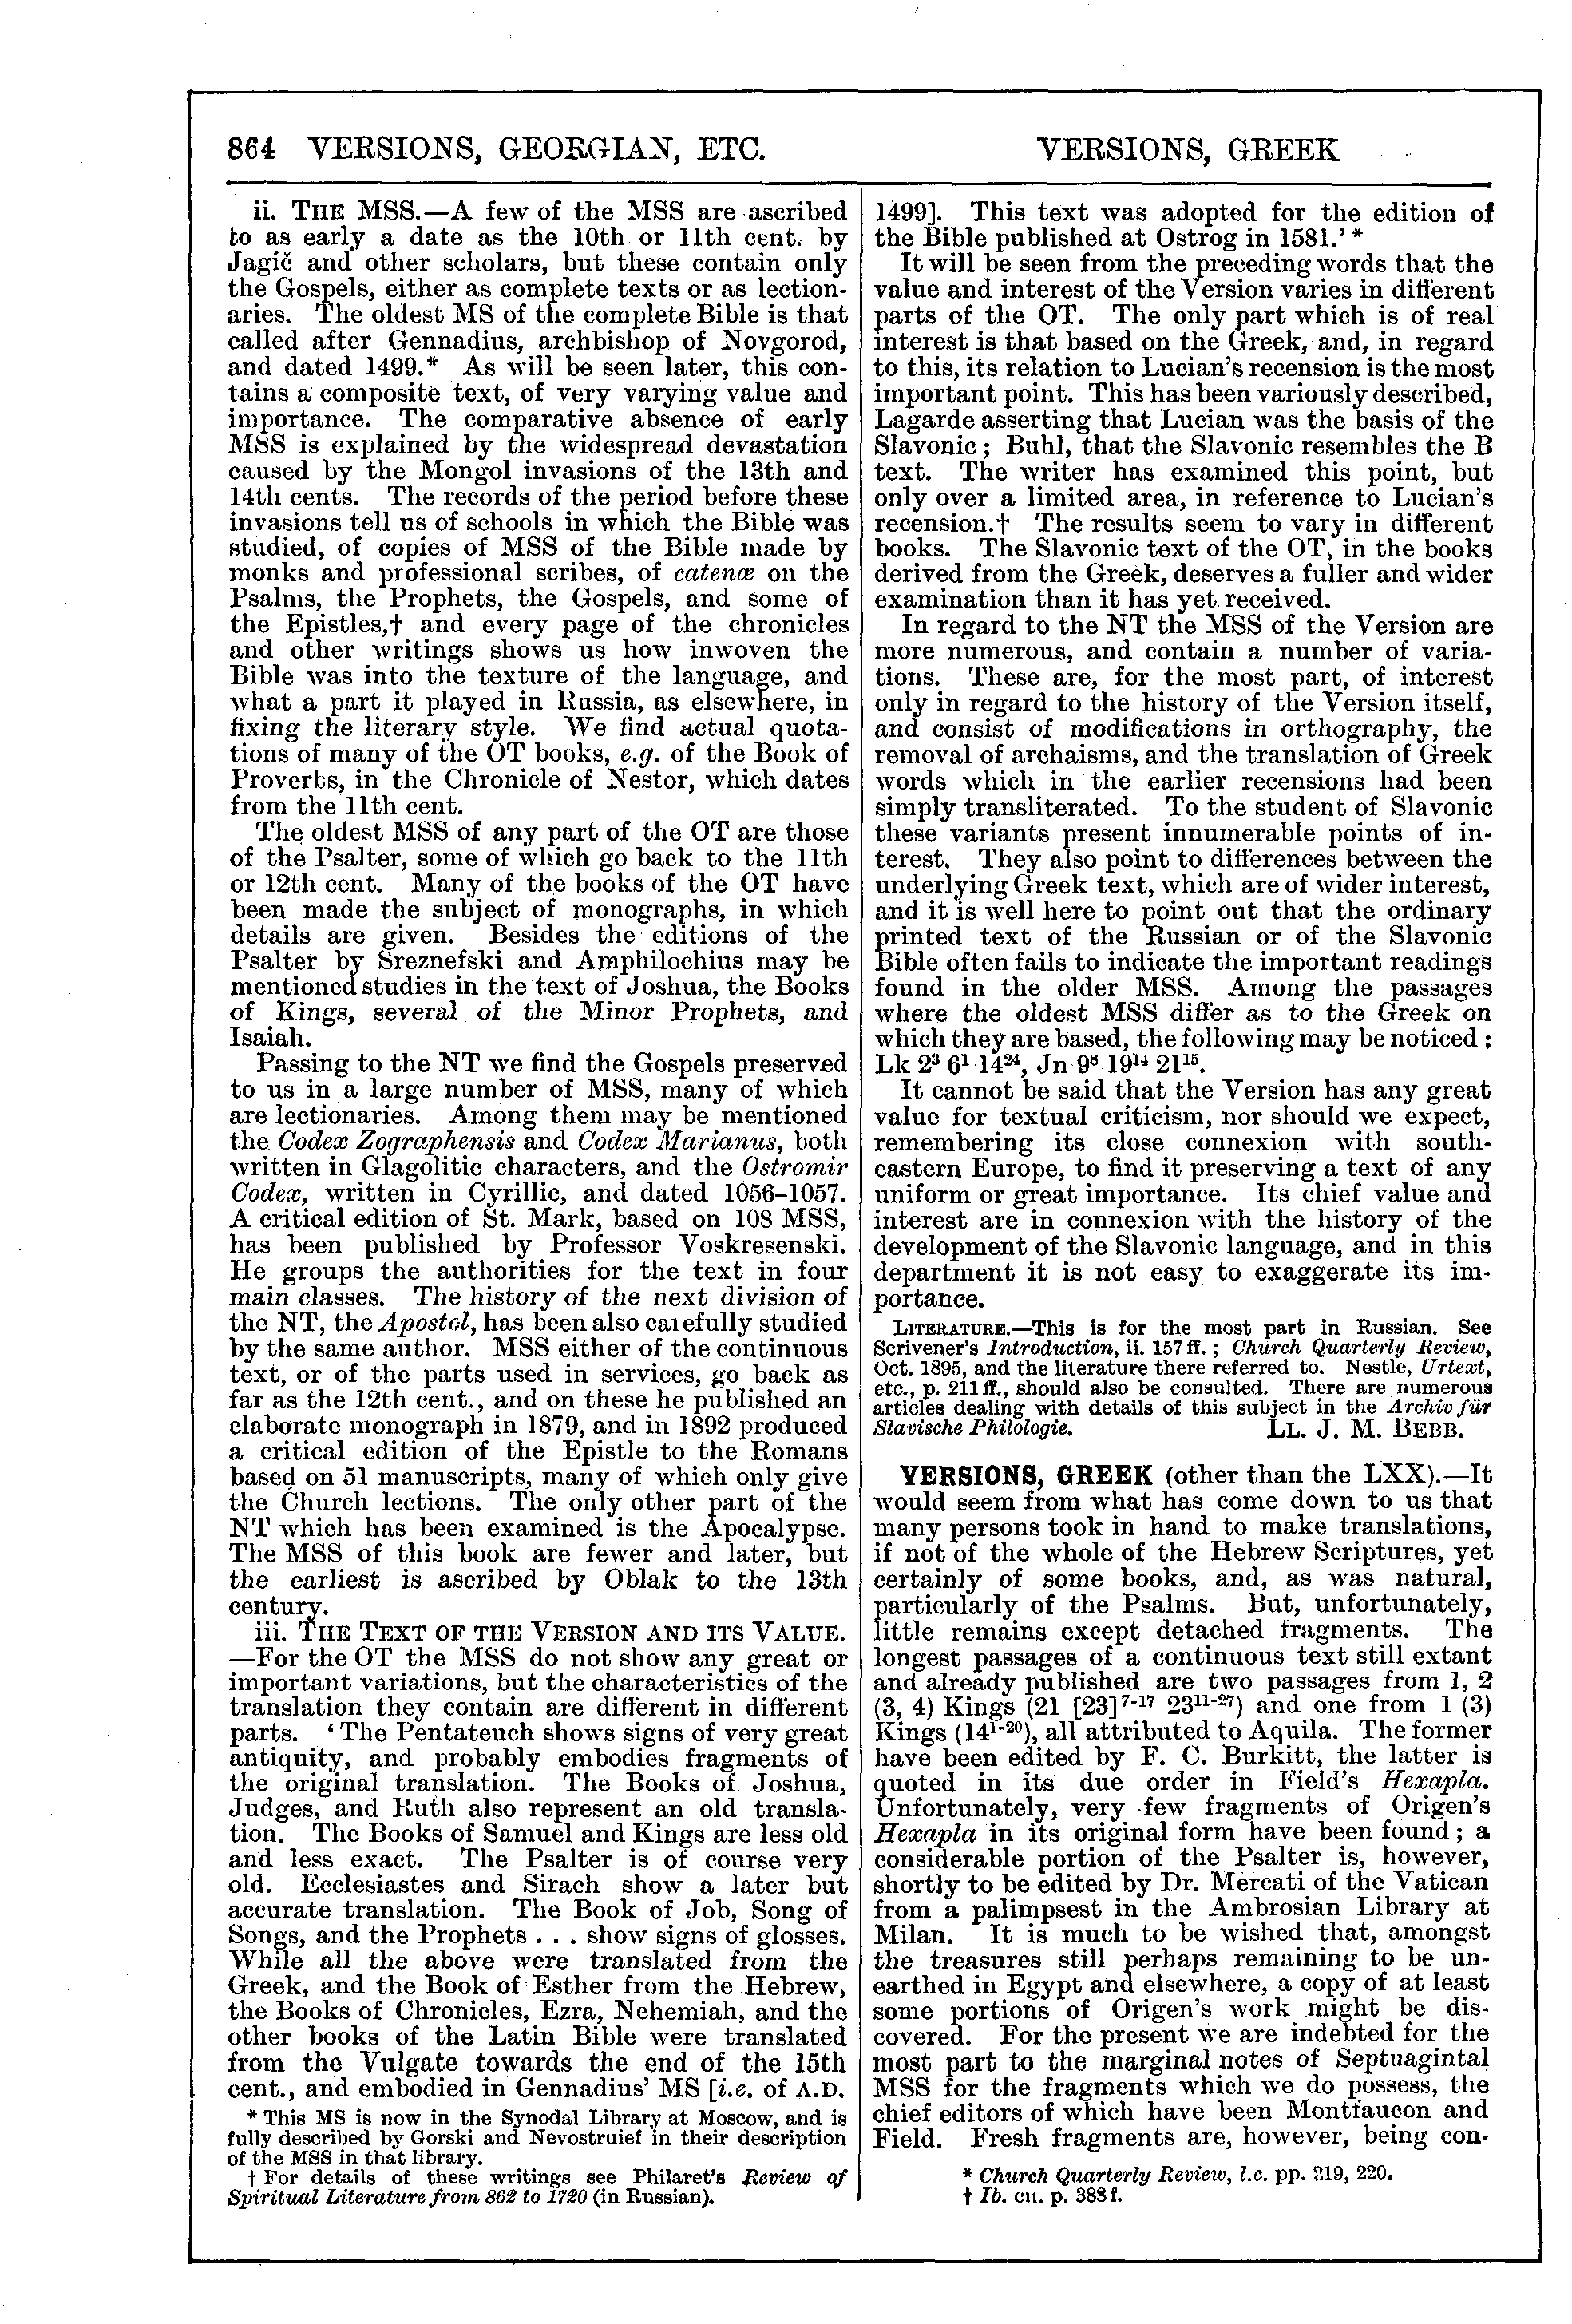 Image of page 864